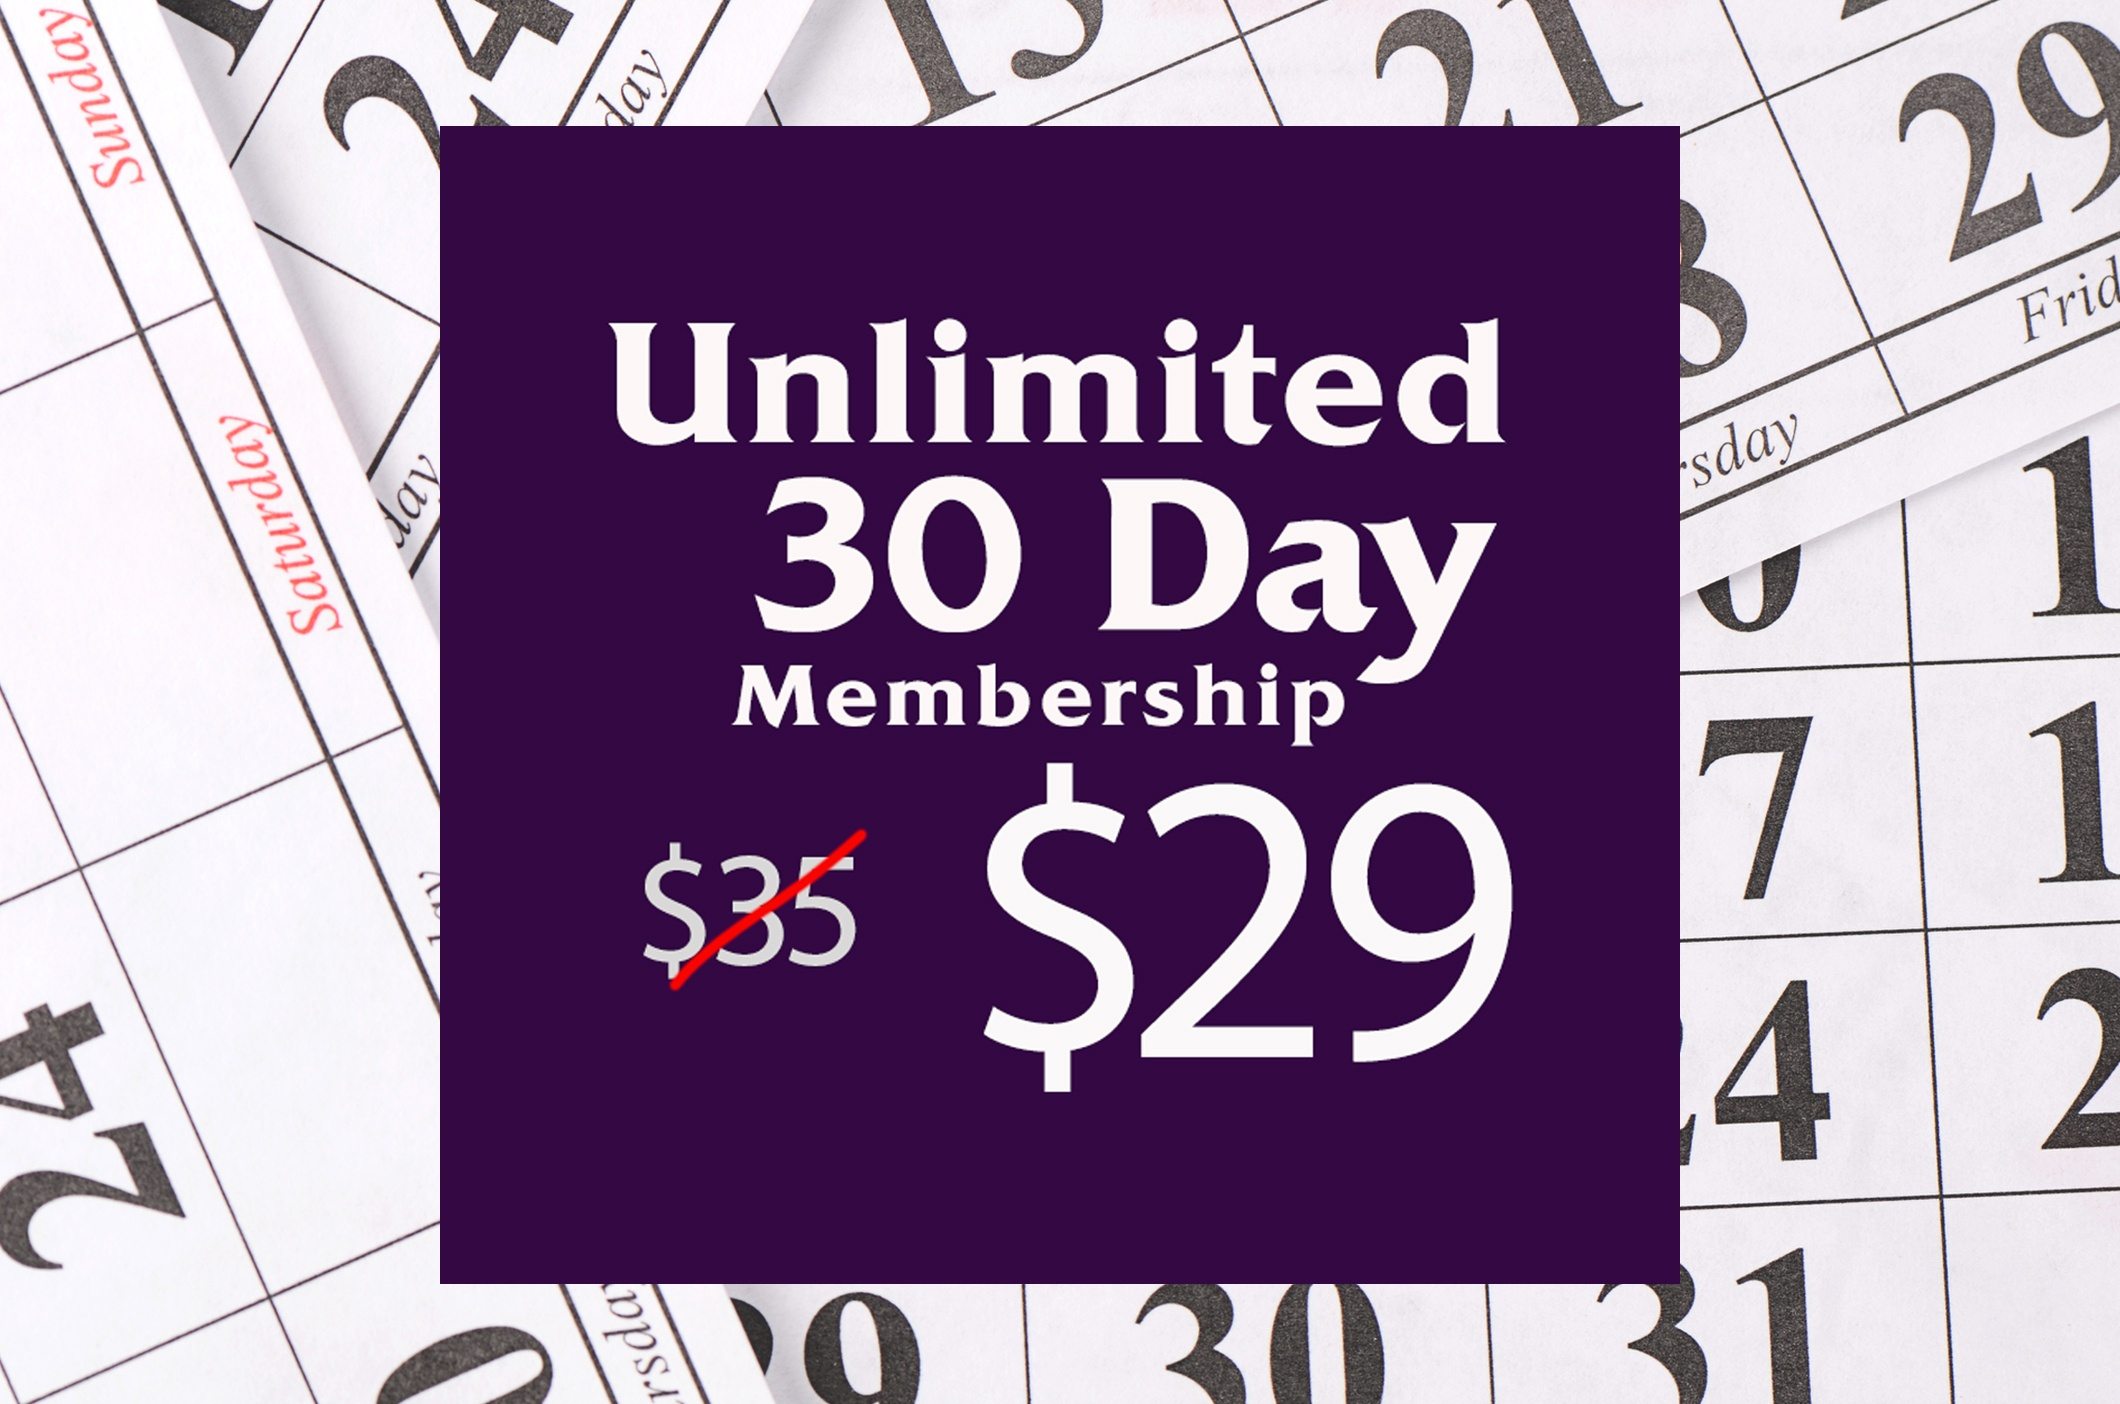 Unlimited 30 Day Membership